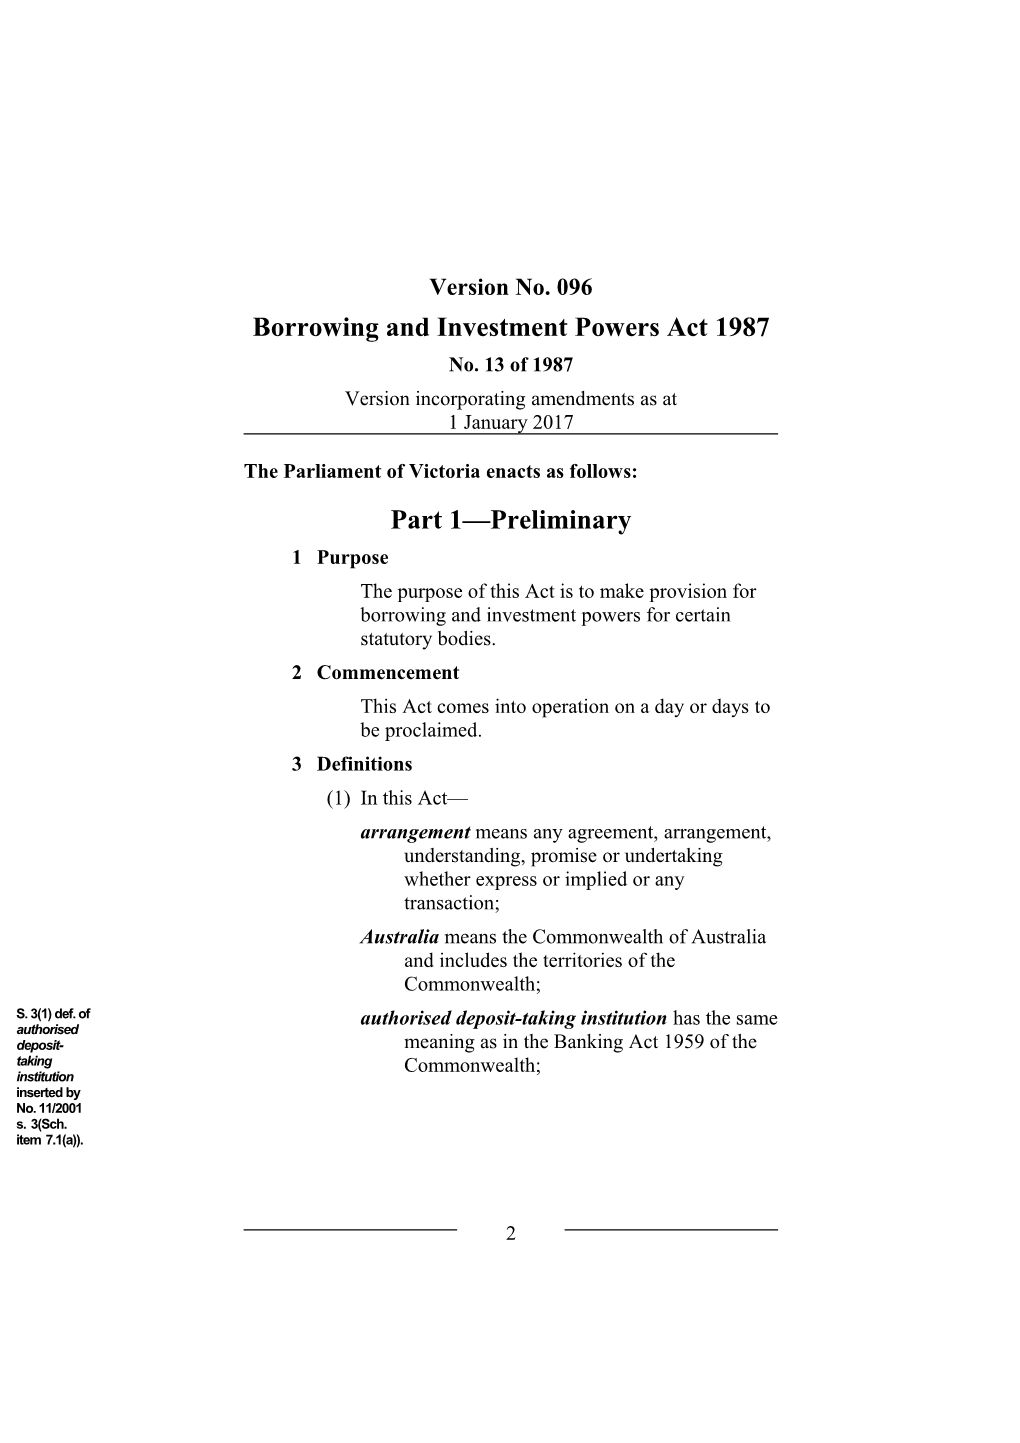 Borrowing and Investment Powers Act 1987